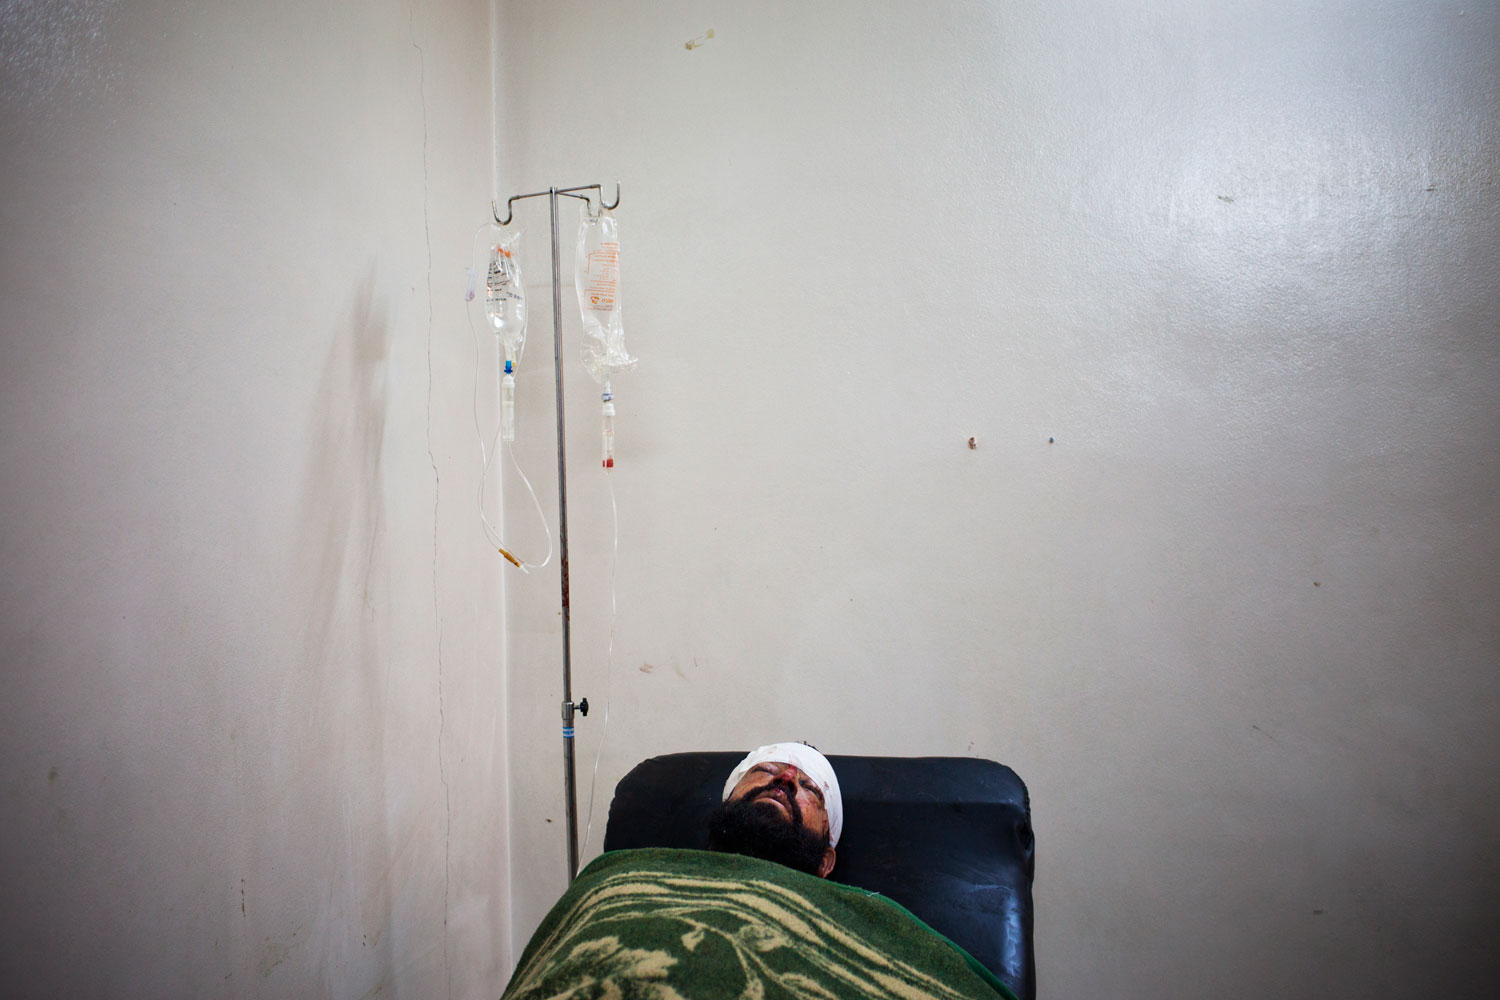 Feb. 23, 2012. A wounded Free Syrian Army member at a clinic in Bab Amr, one day after the attack that killed Rémi Ochlik and Marie Colvin.